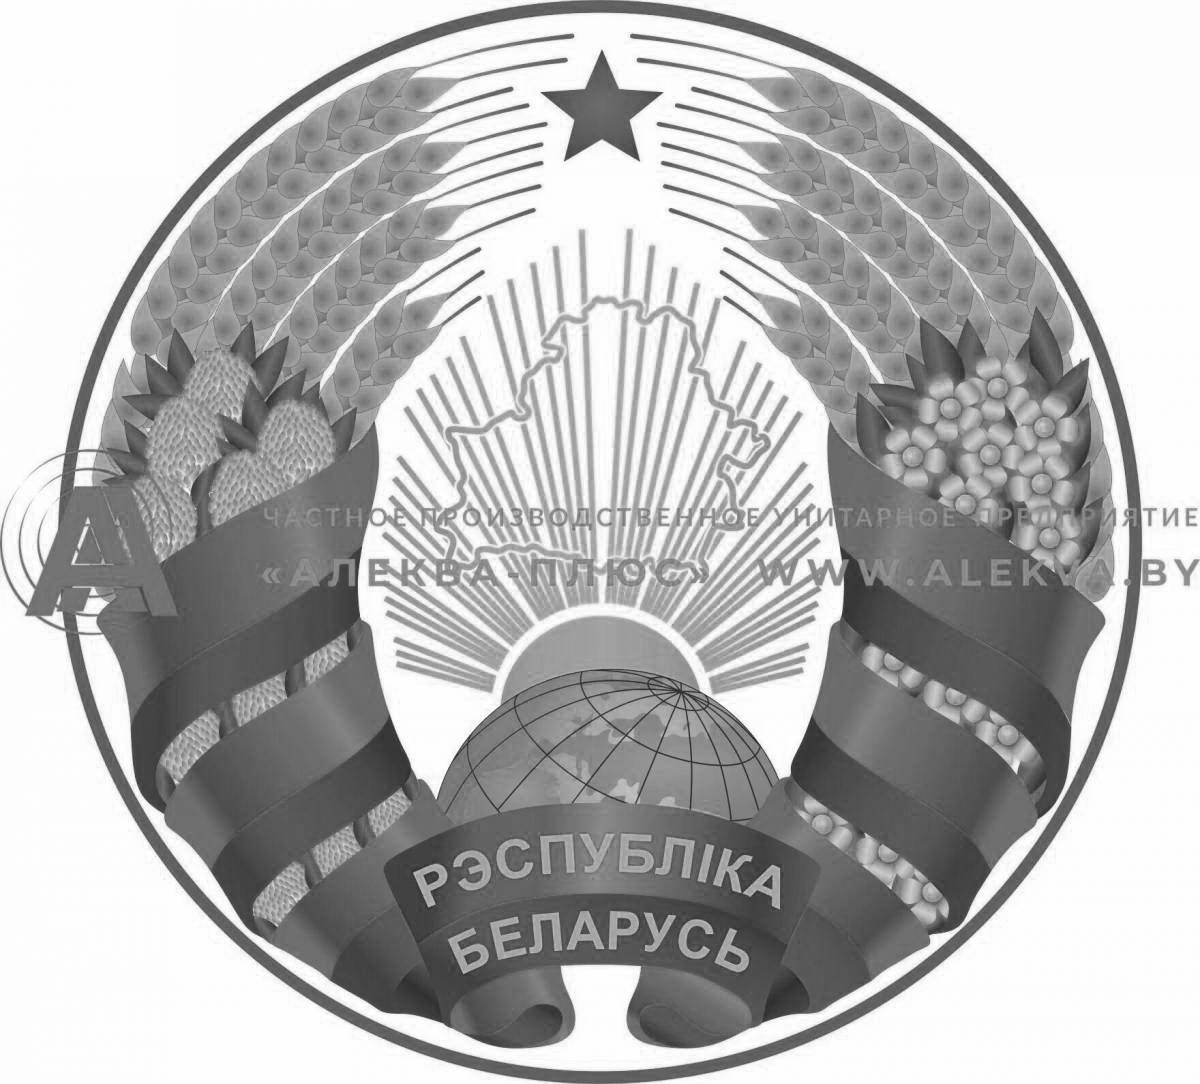 Bright coloring coat of arms of the Republic of Belarus